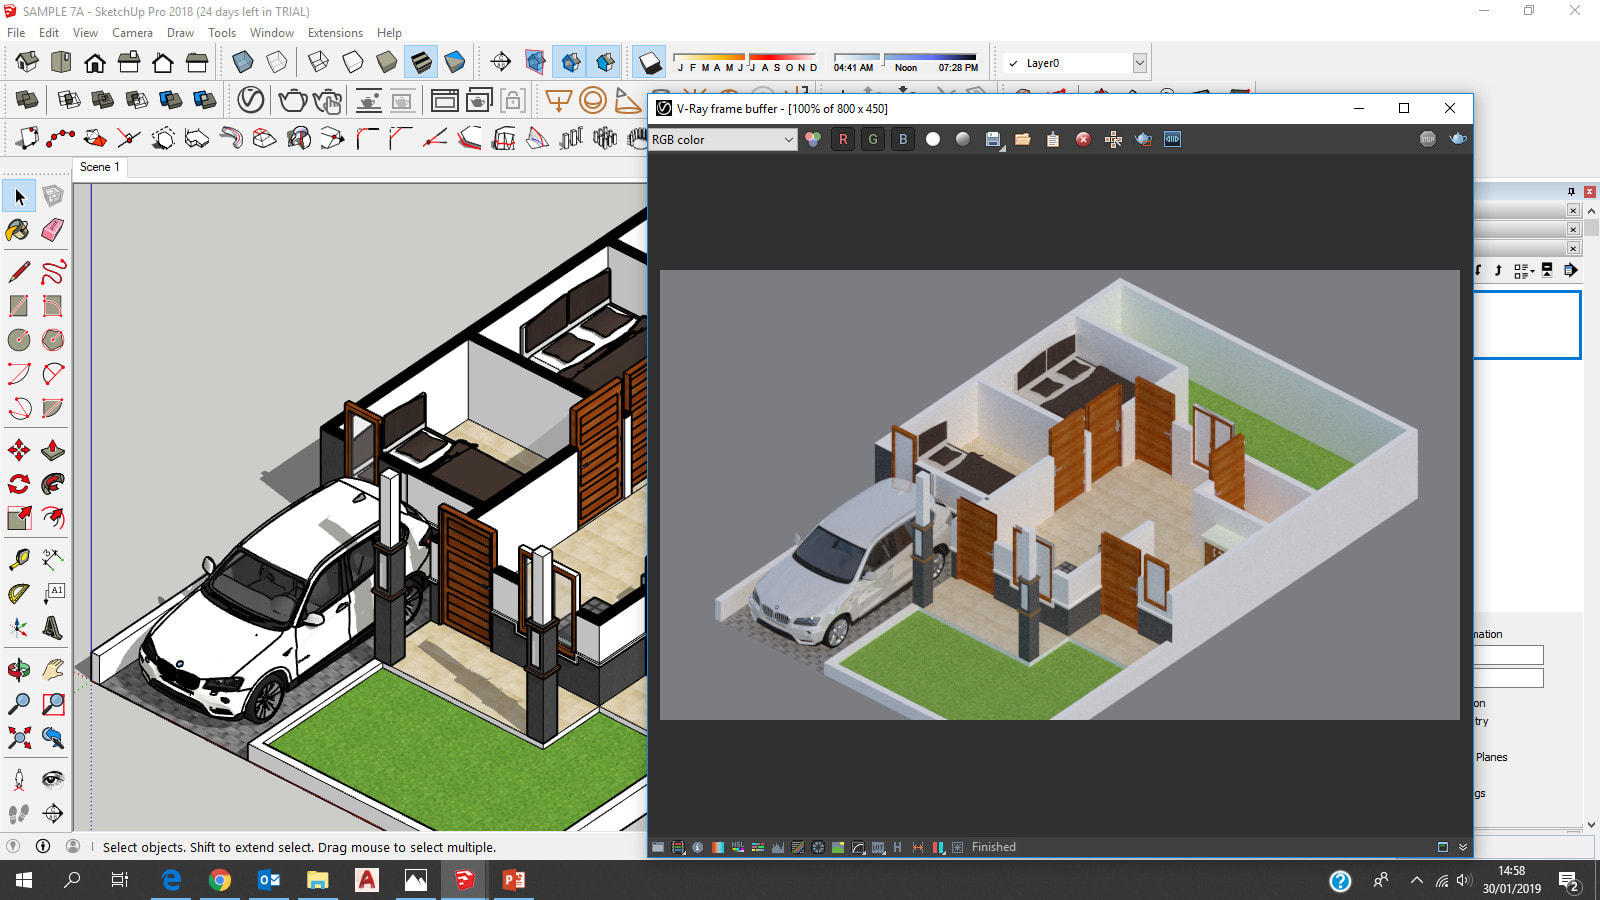 sketchup pro 2018 trial download